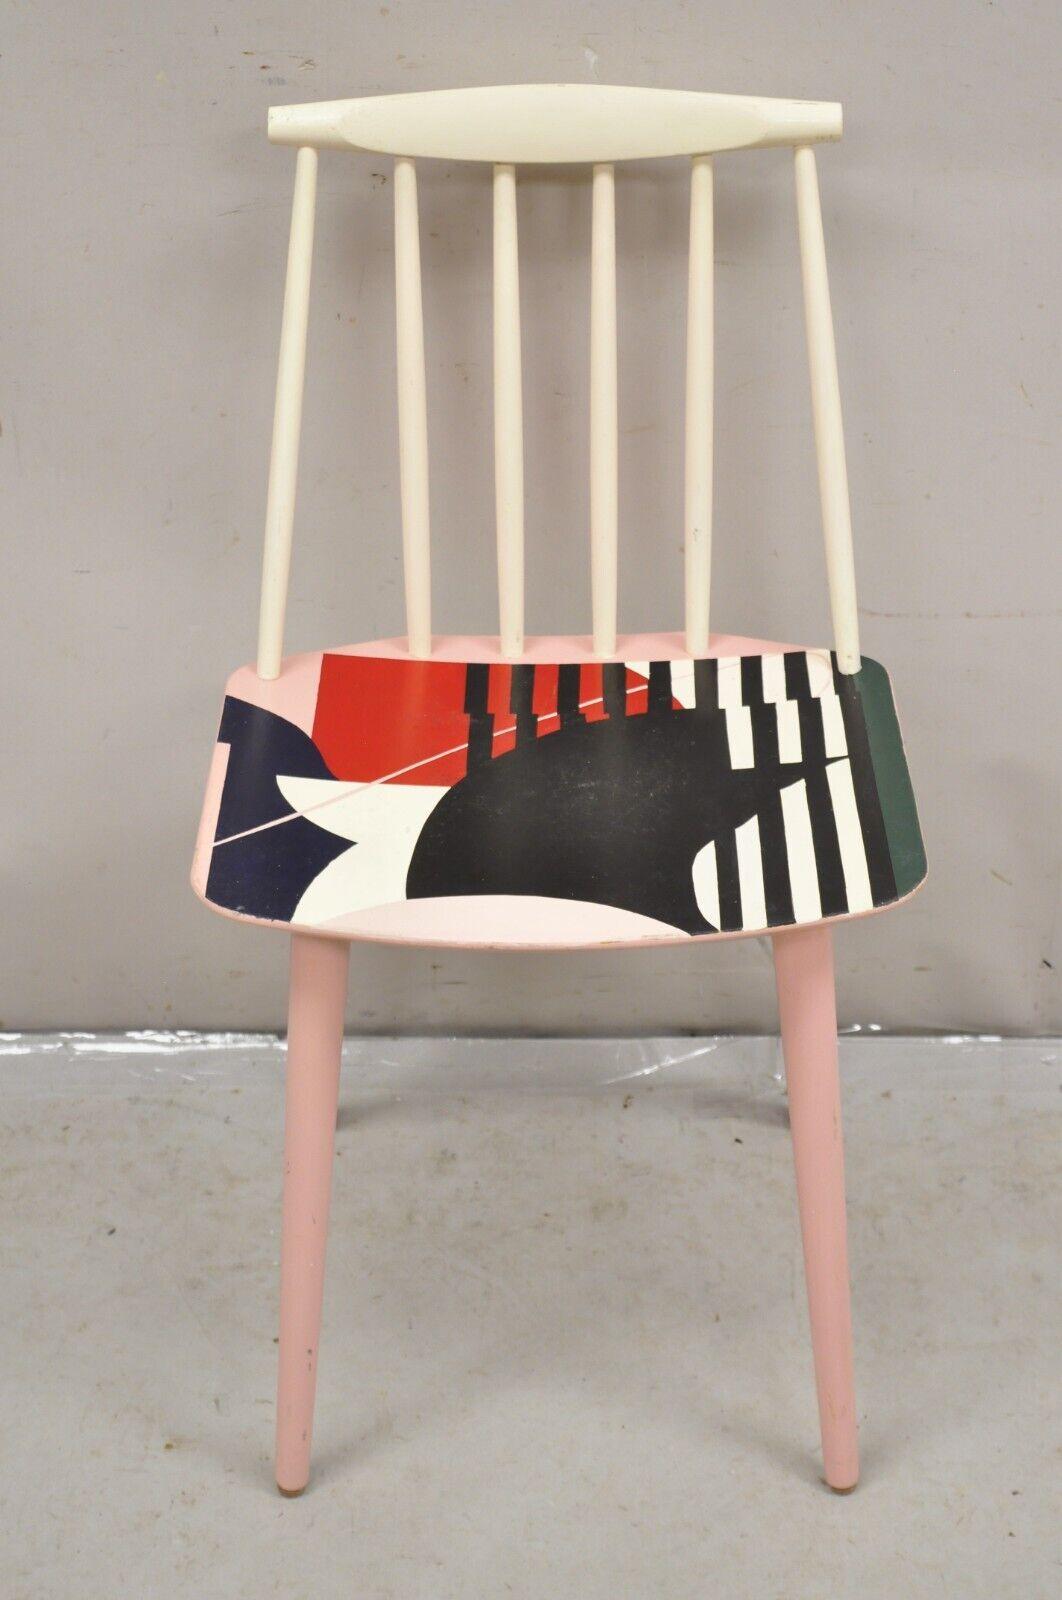 KAY Folke Pålsson J77 Dining Side Chair with Abstract Hand Painted Artwork, Signed KMAC. Painted in various colors including soft pink, white, black, green, blue, and red. Circa Late 20th Century. Measurements: 31.5